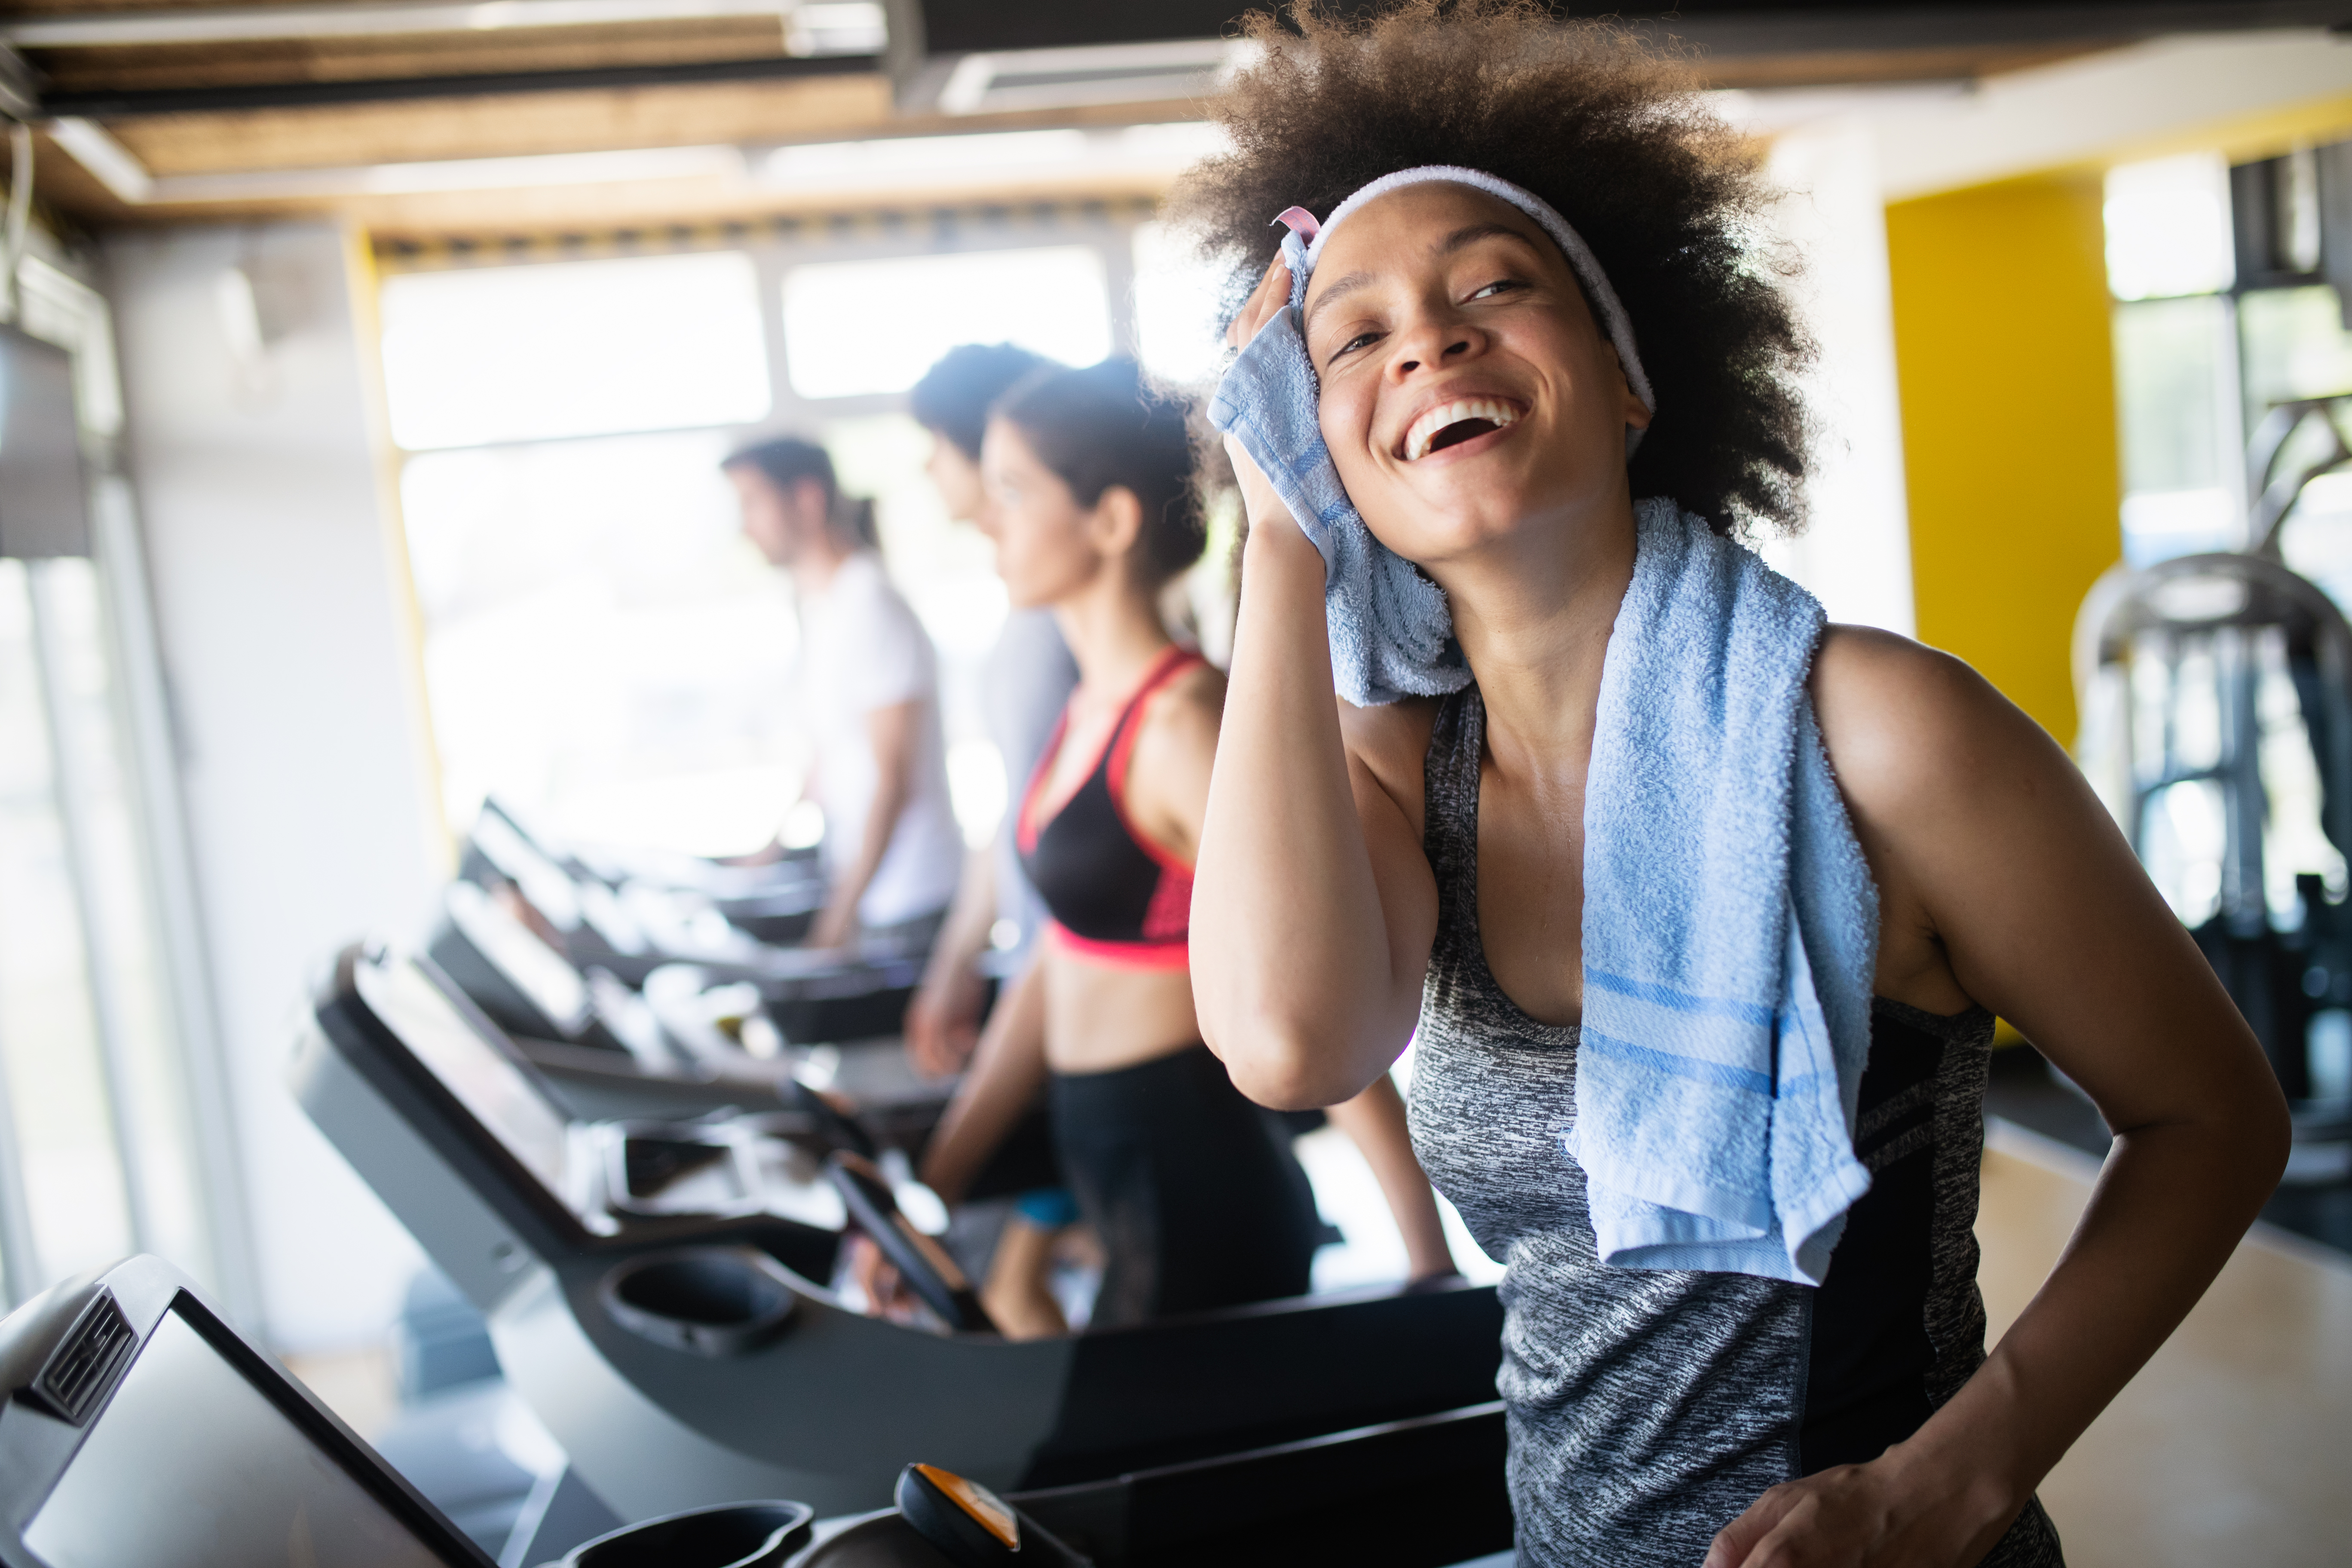 How to Get Started Working Out at the Gym